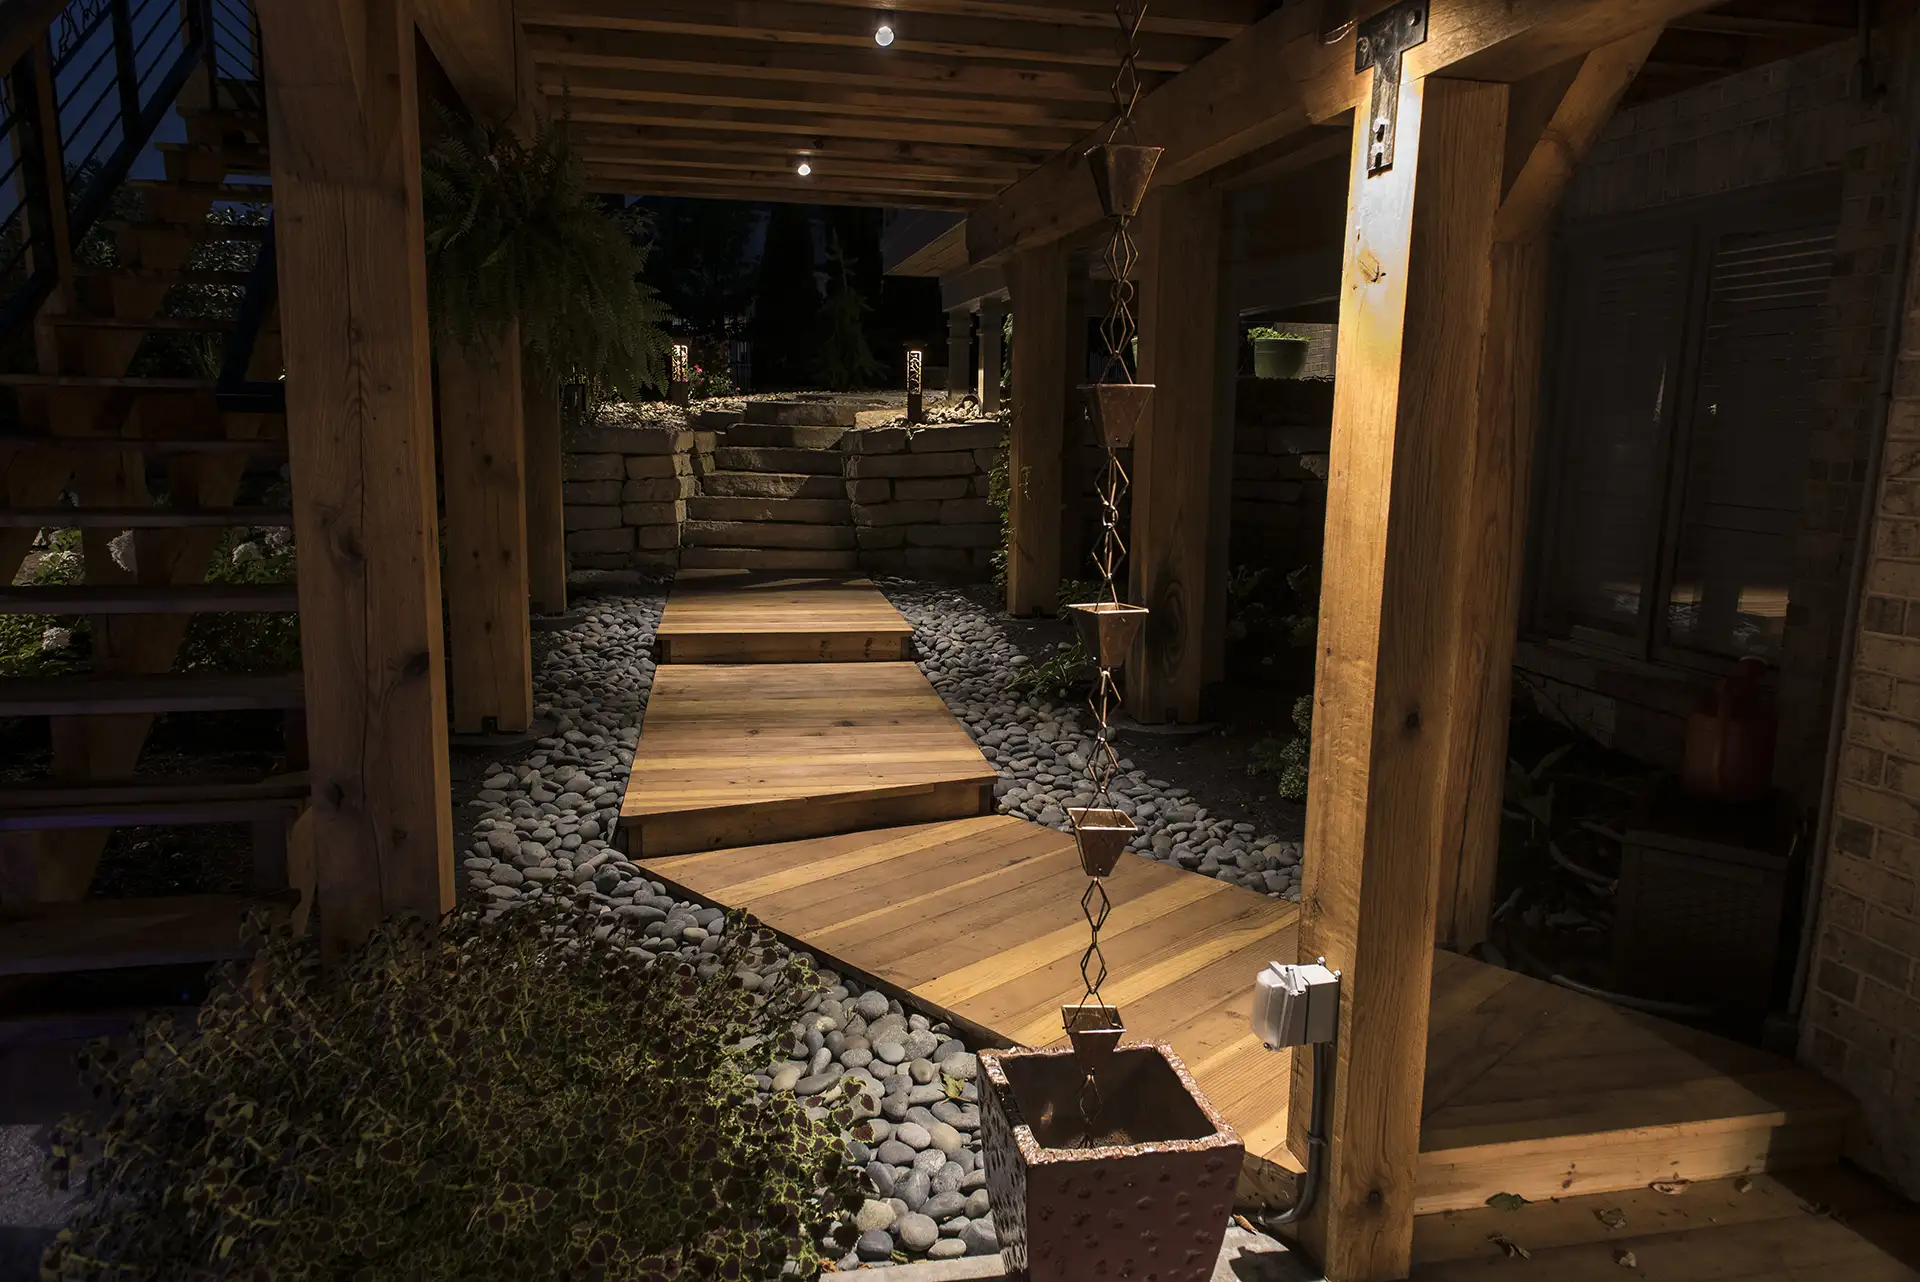 Fuson residence image 11 boardwalk path Lighthouse Outdoor Lighting and Audio Delaware